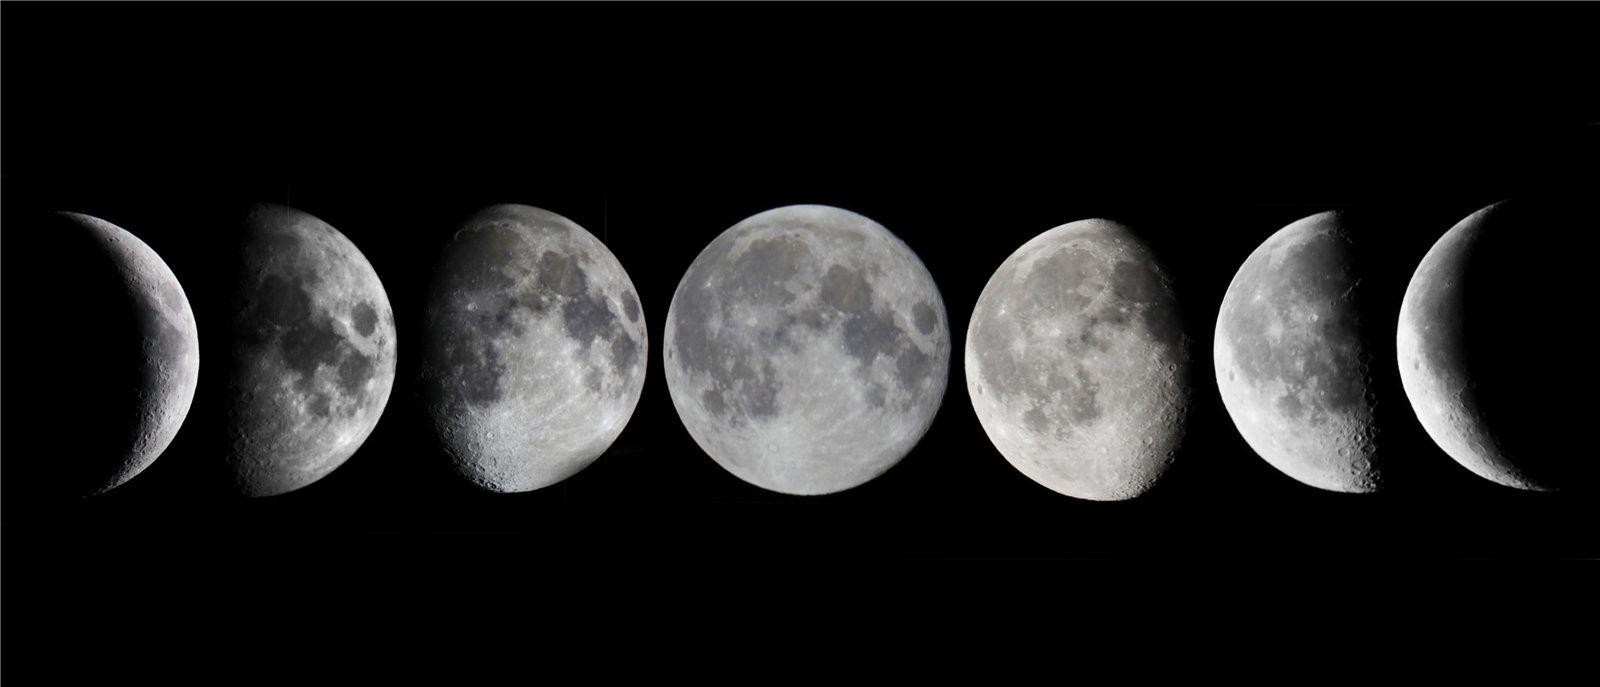 The Phases of the Moon Wallpaper 1600x687